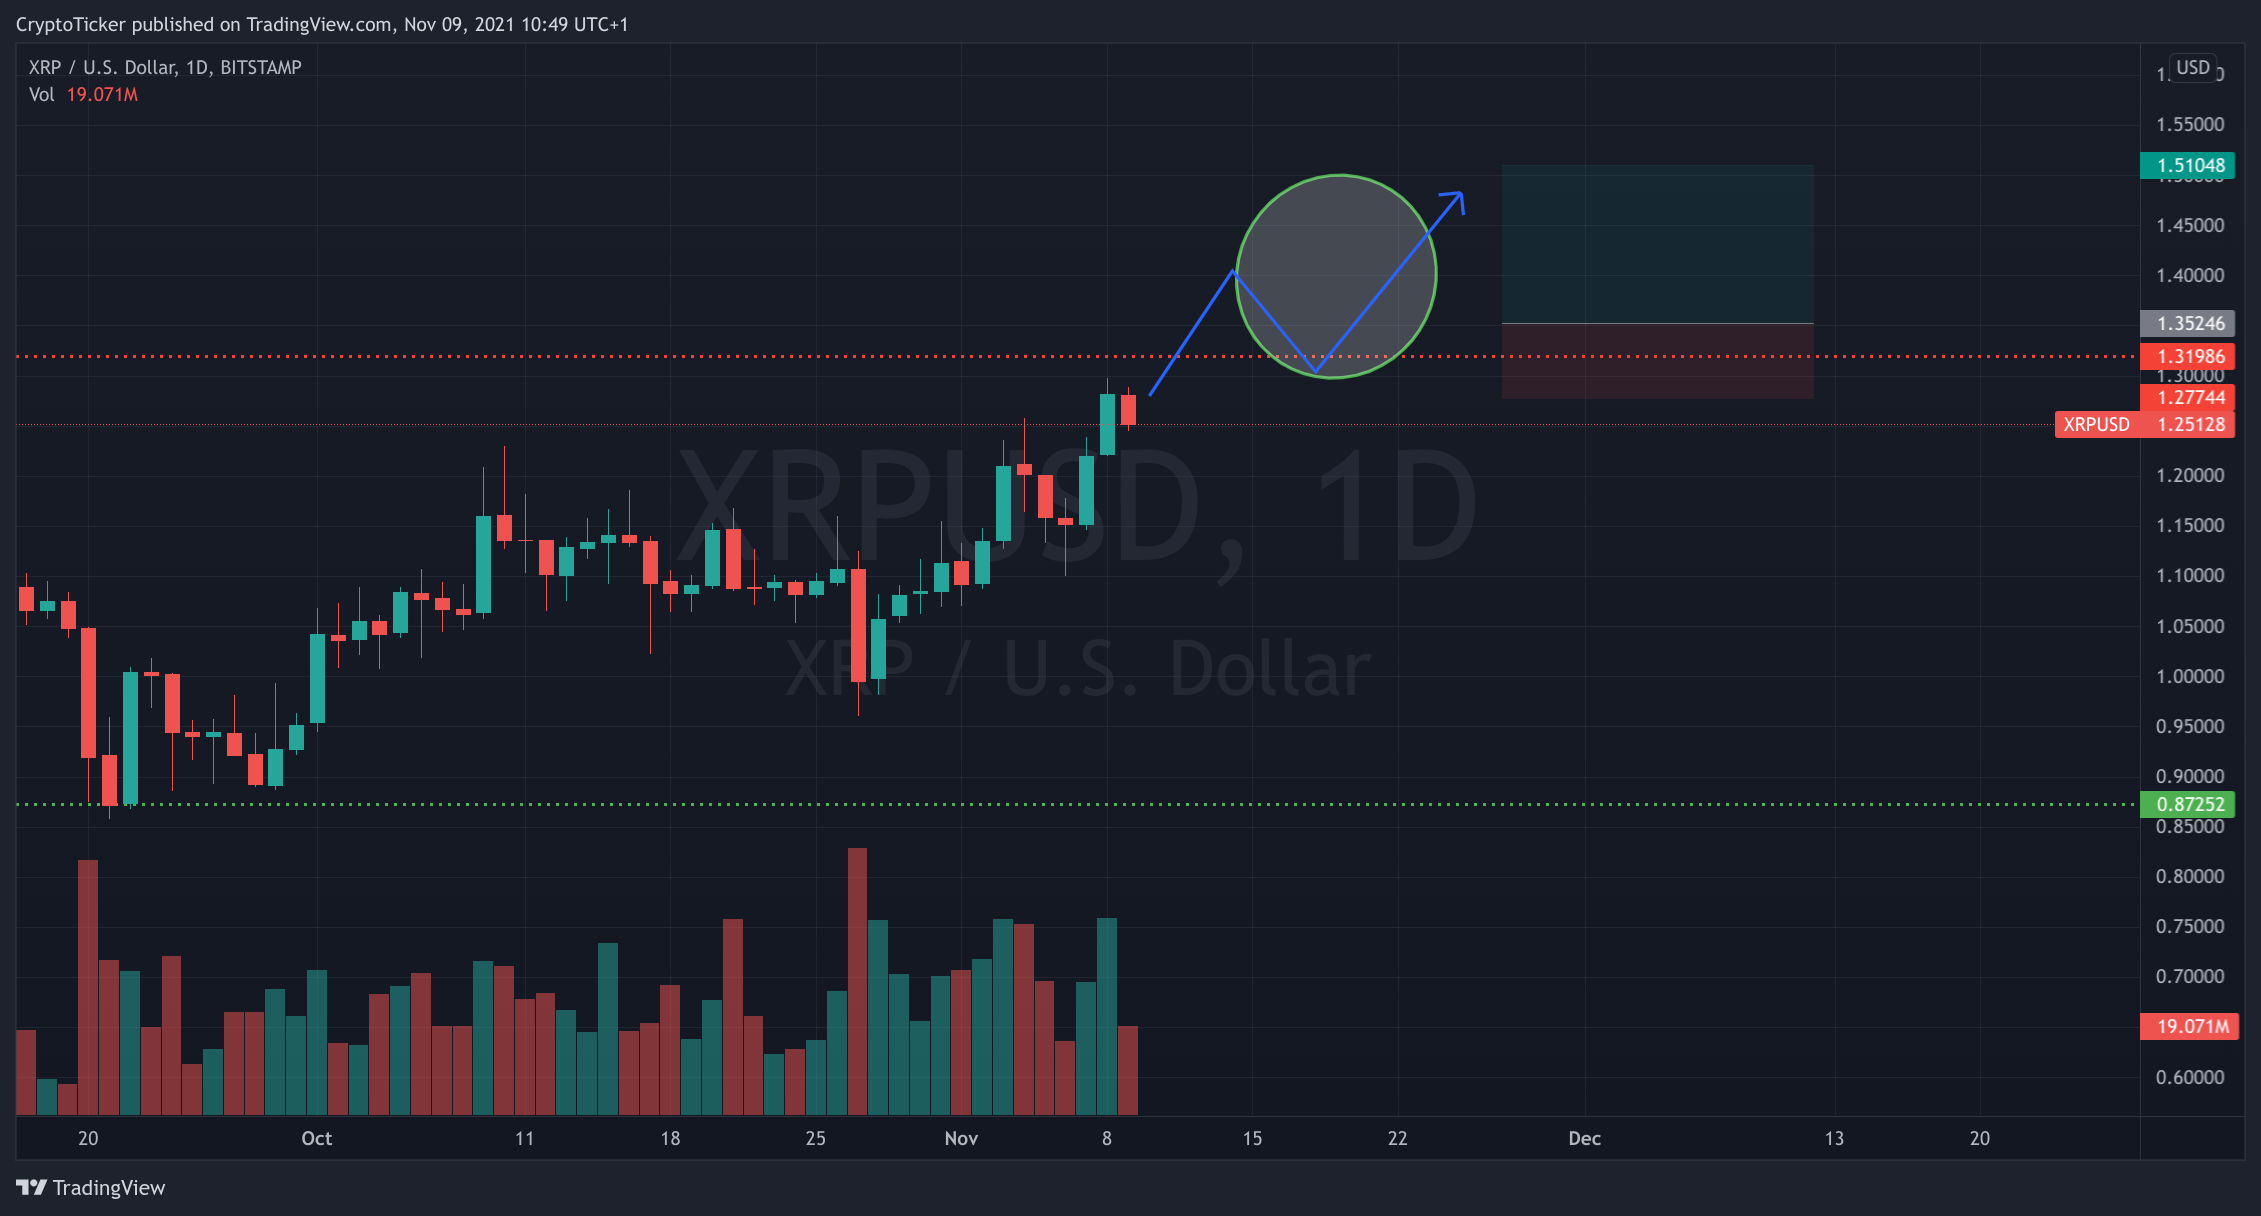 XRP/USD 1-day chart showing a potential trade setup